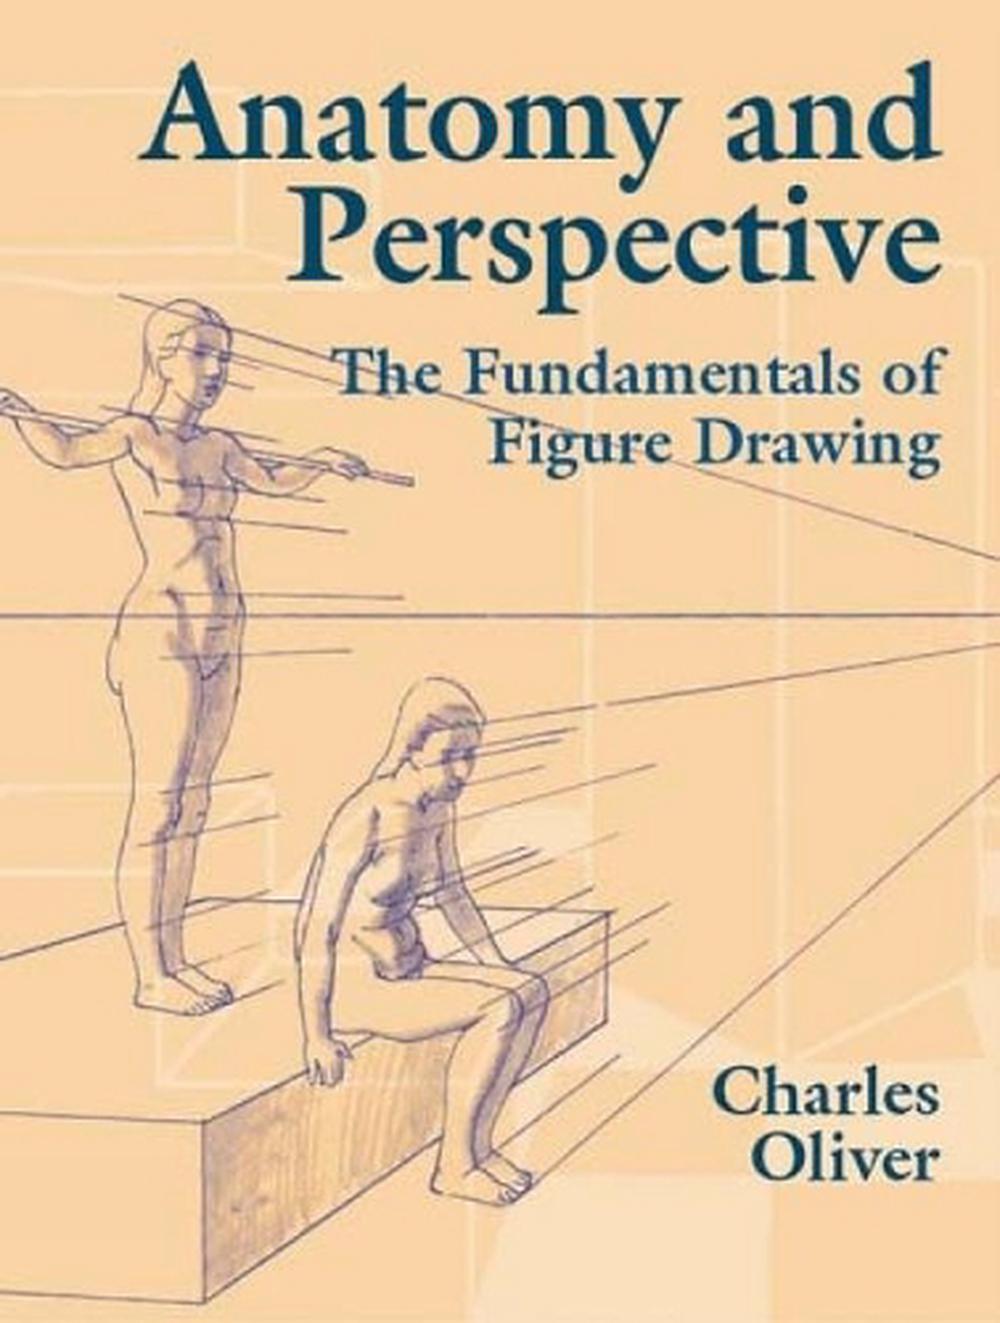 Anatomy and Perspective: The Fundamentals of Figure Drawing by Charles